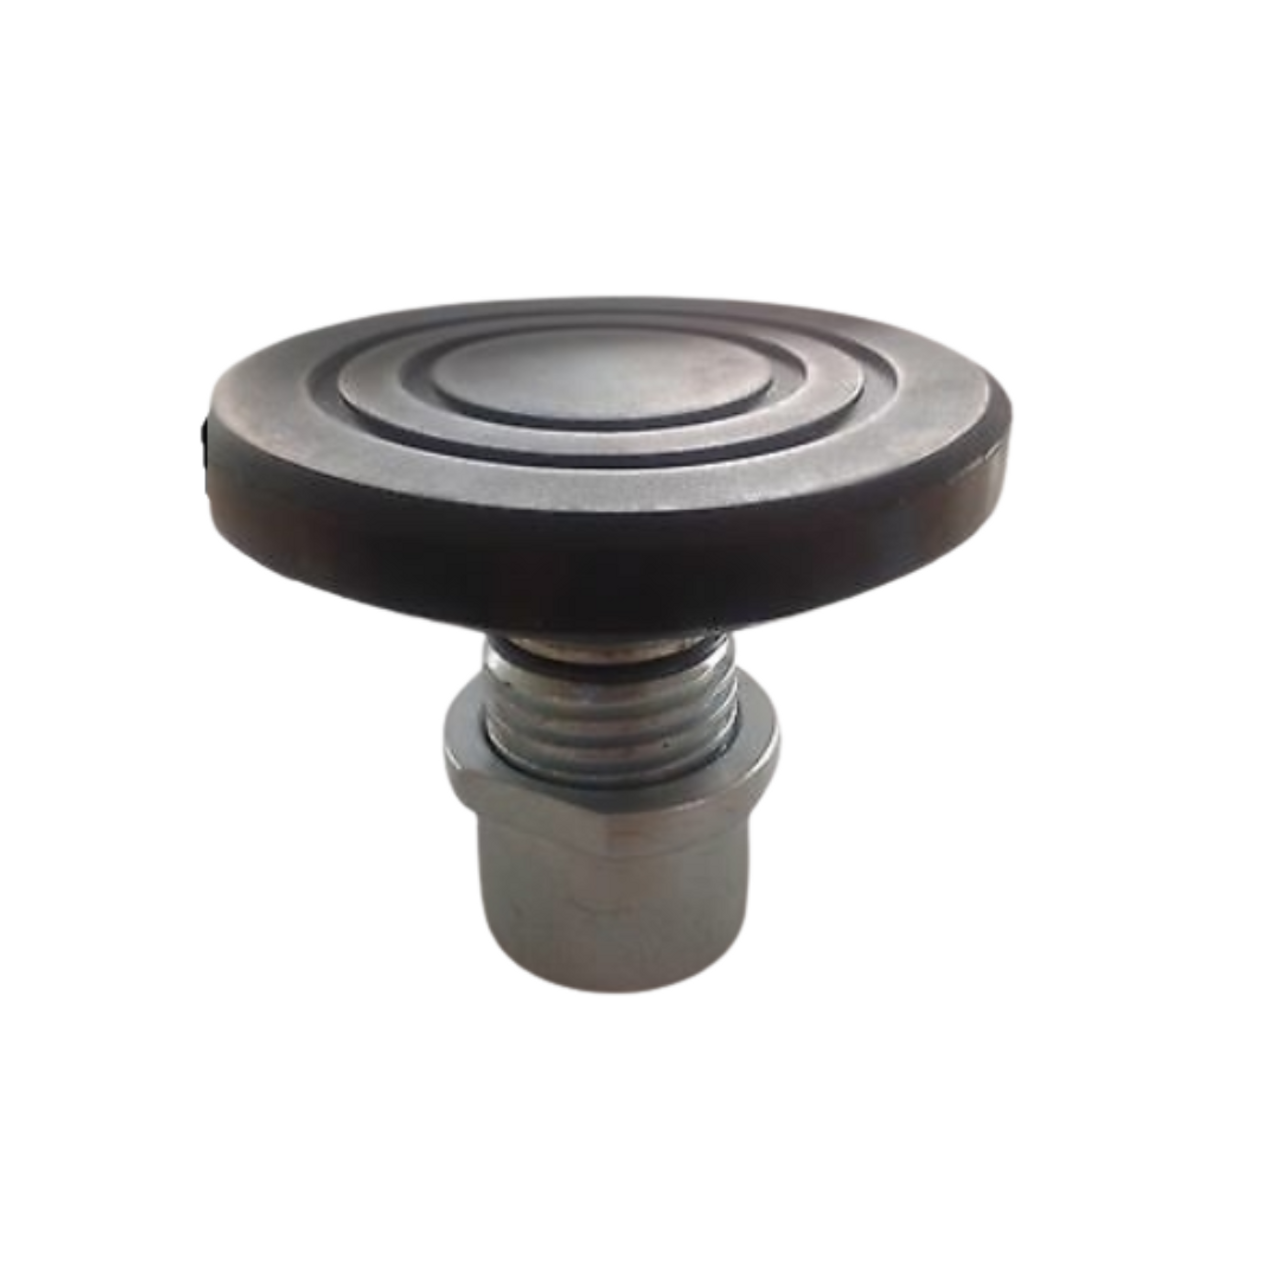 Challenger Lifts - ROUND FOOT PADS -  B2260